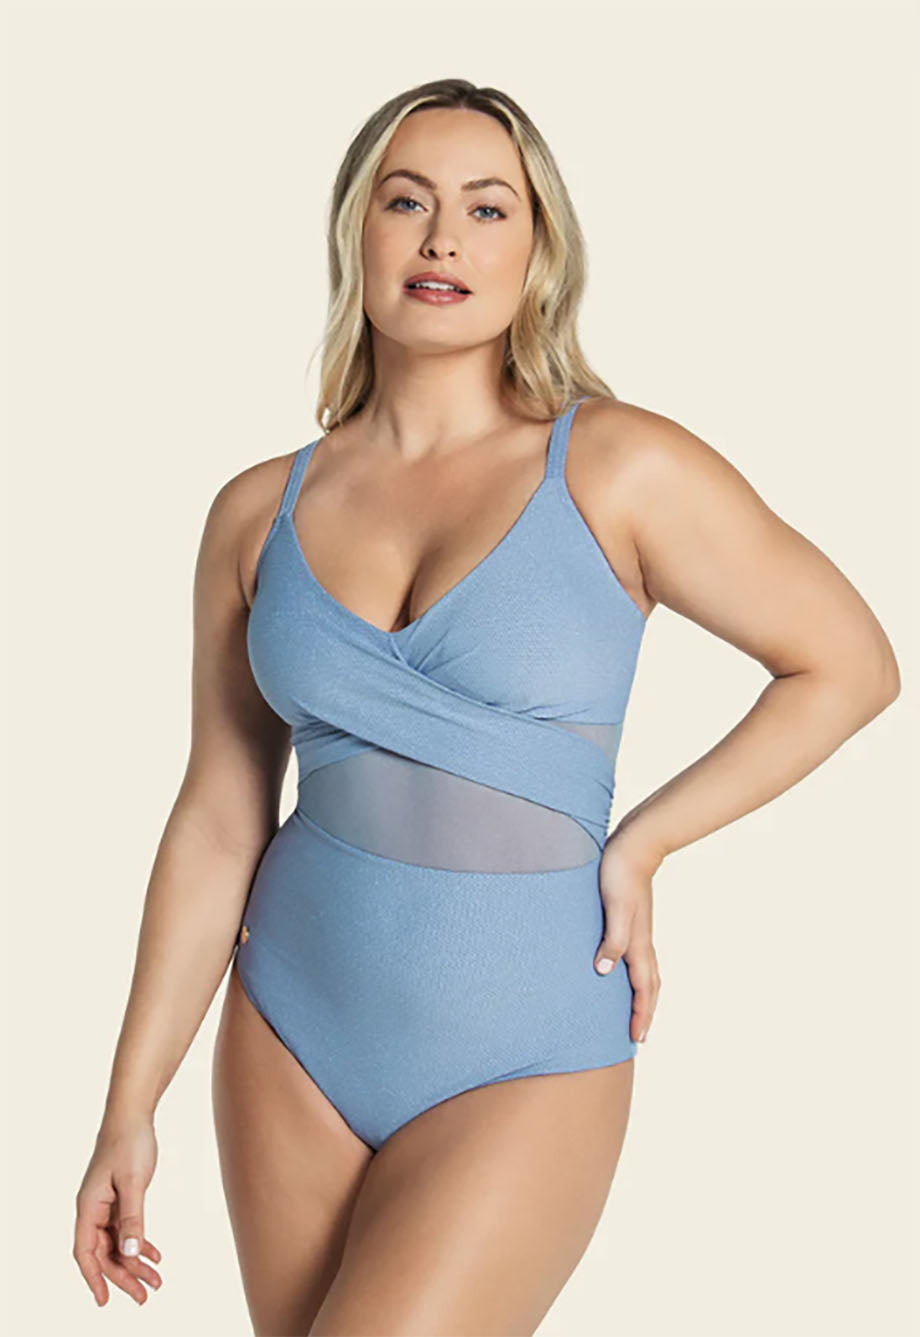 Swimsuits for big busts that still look stylish - Tweak India